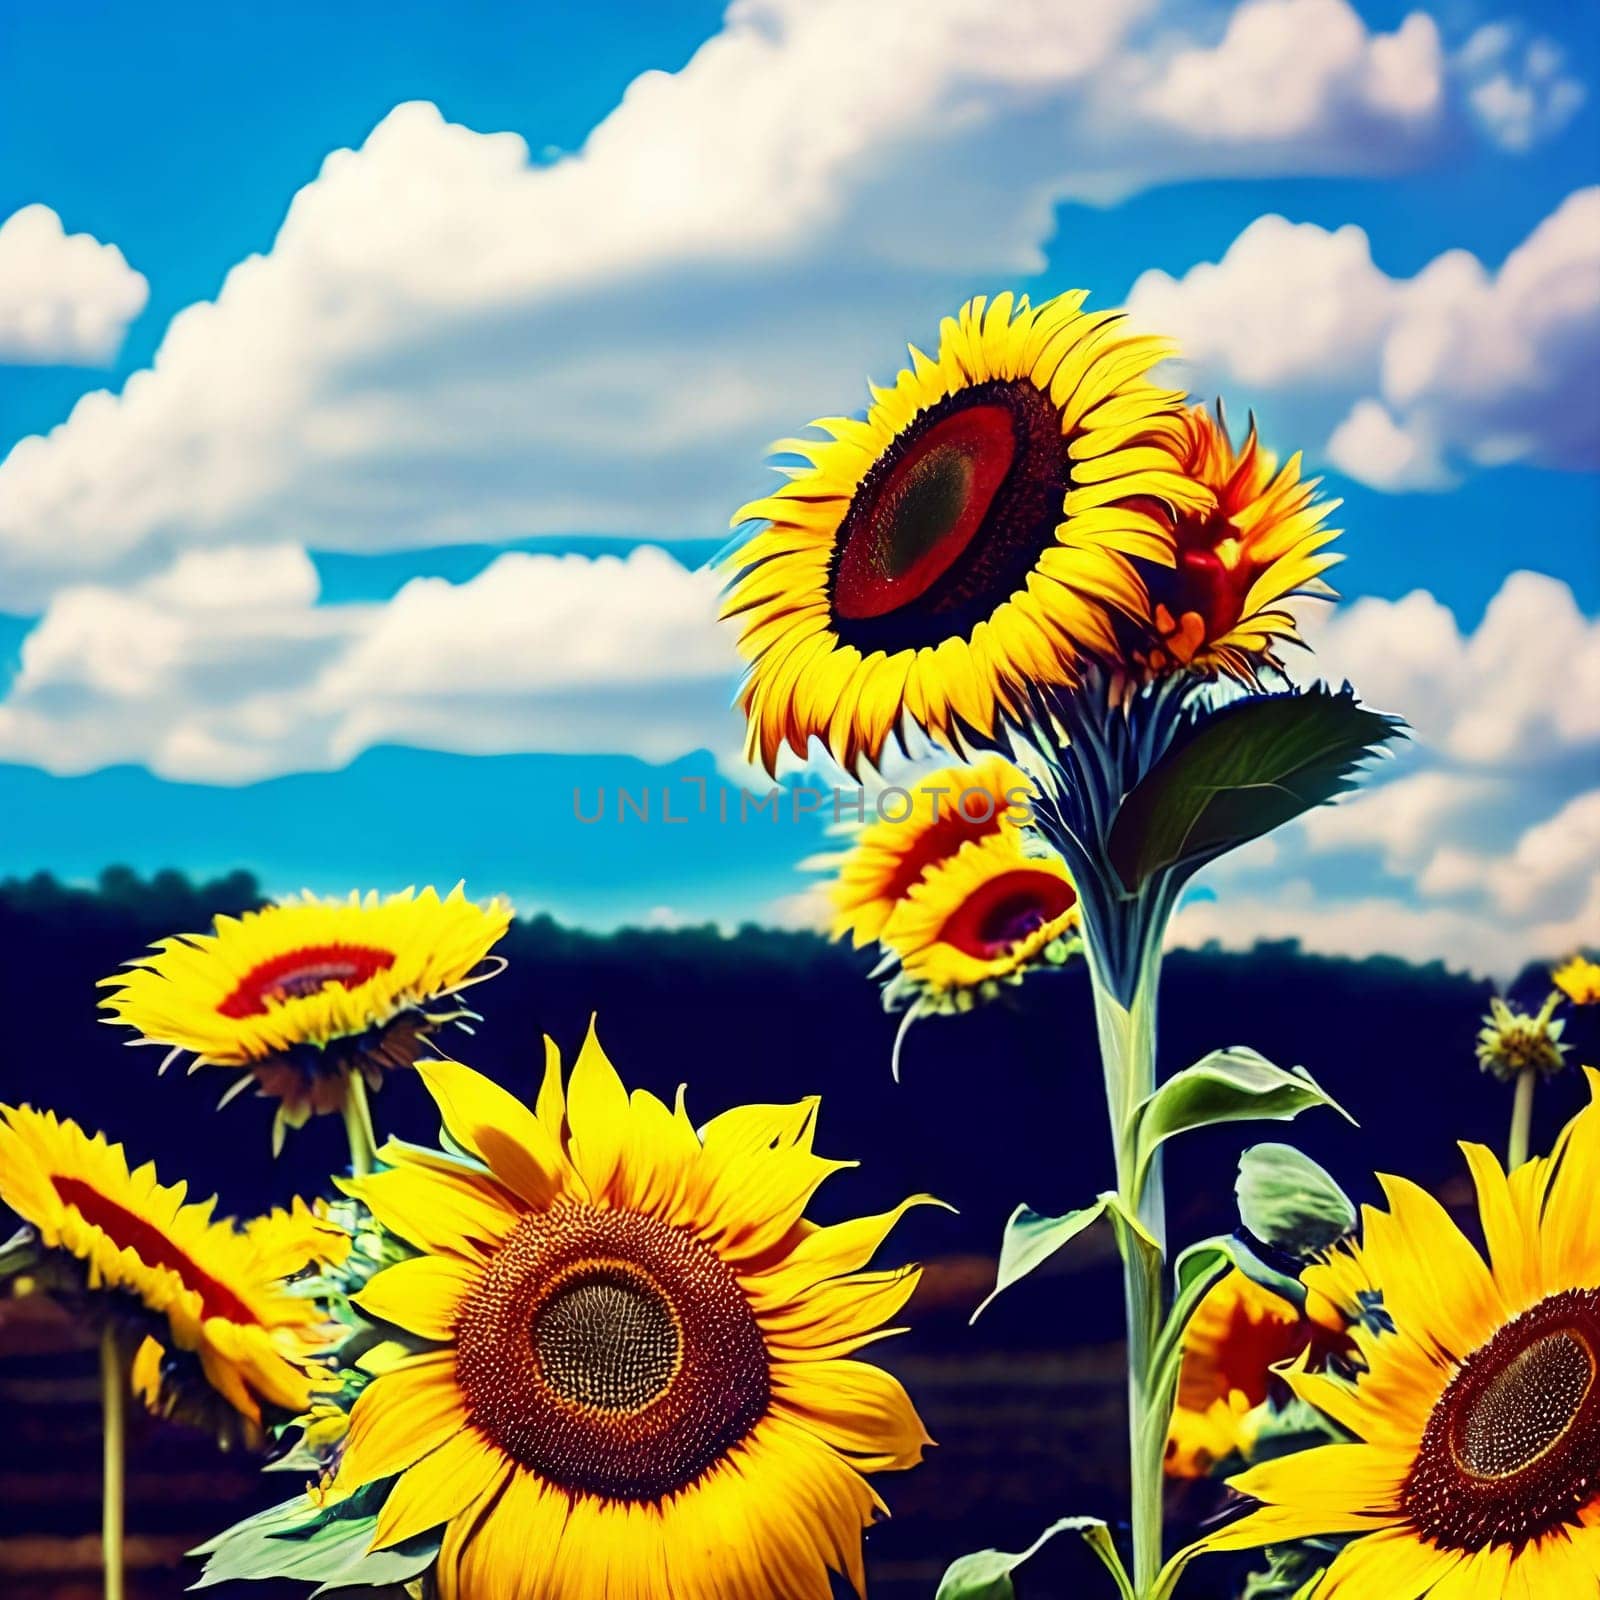 Captivating summer backdrop with a mix of sunflowers and daisies set against a clear blue sky.